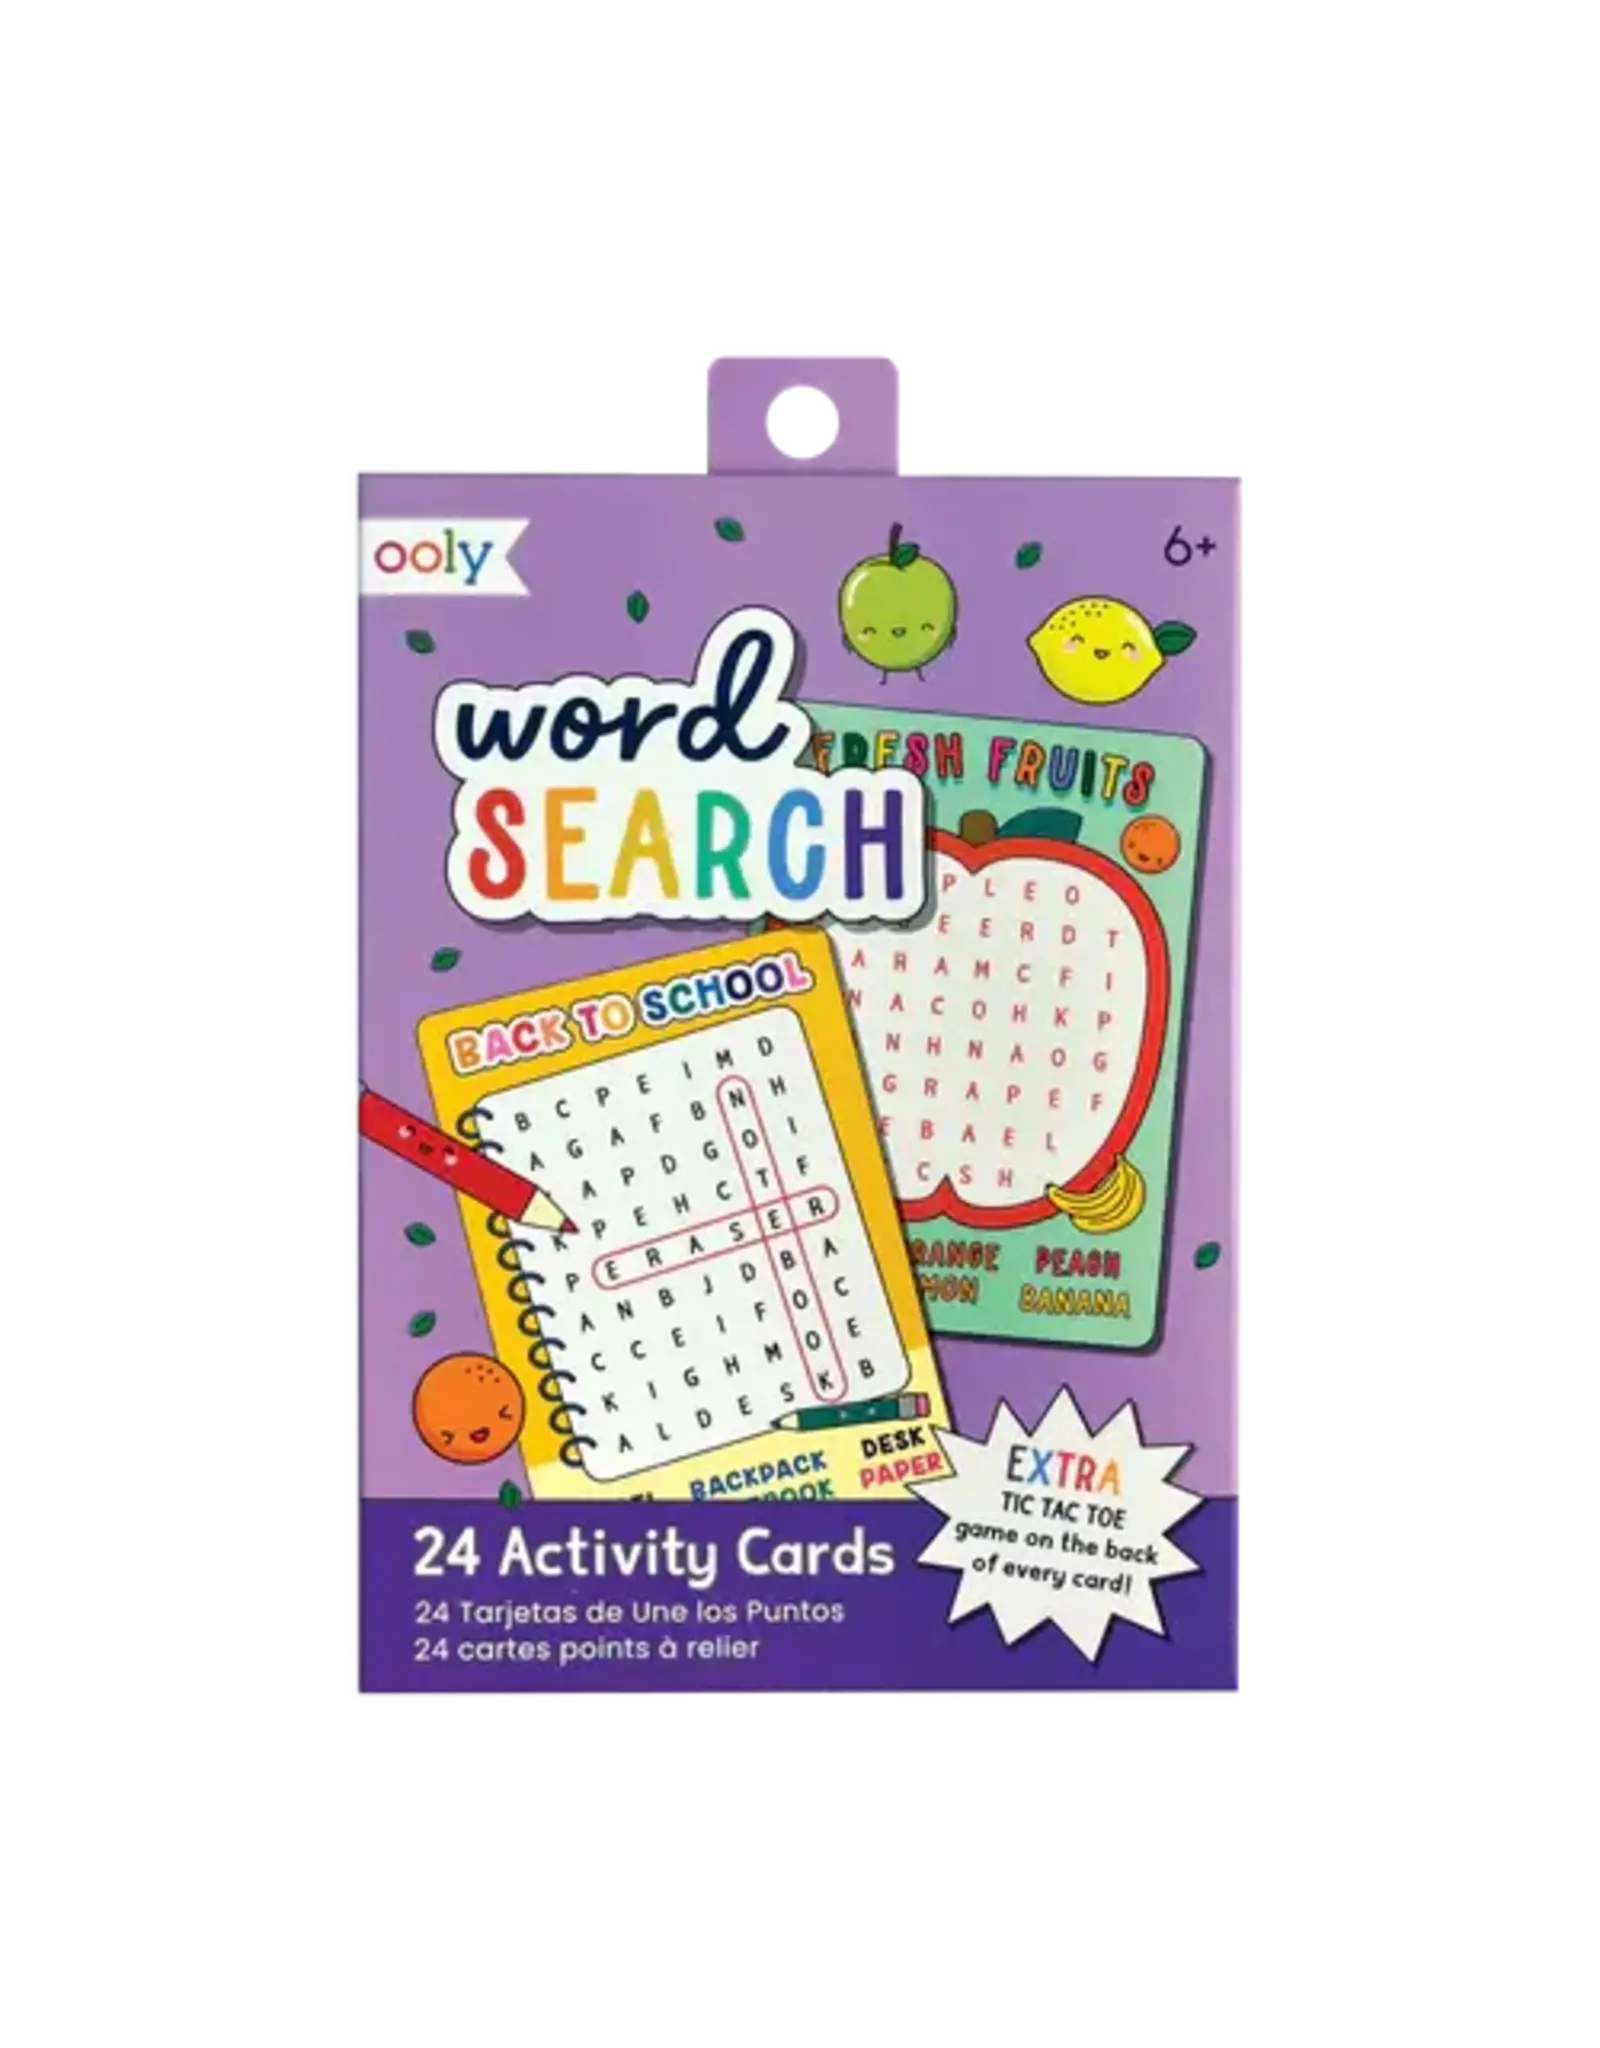 Ooly Word Search 24 Activity cards